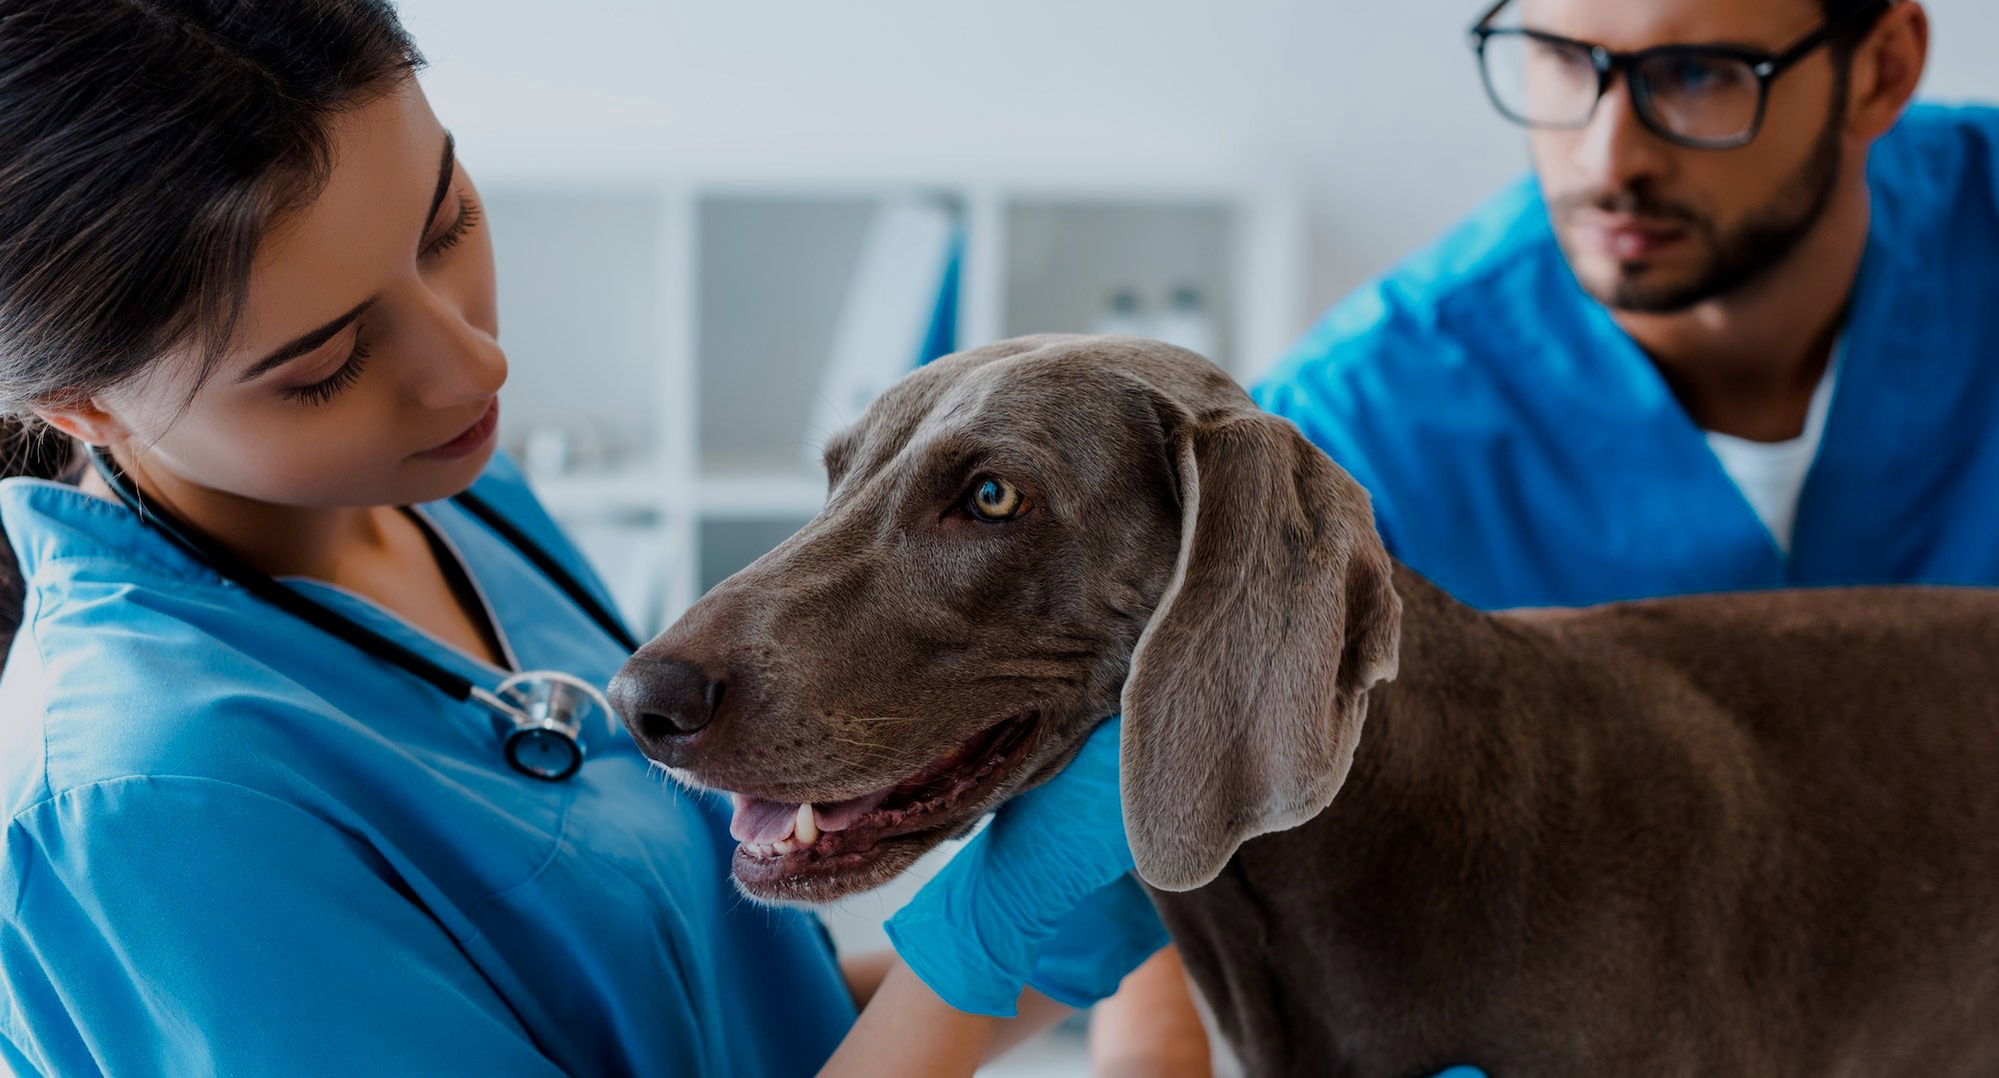 Image shows a female and male vet examining a dog in a surgery